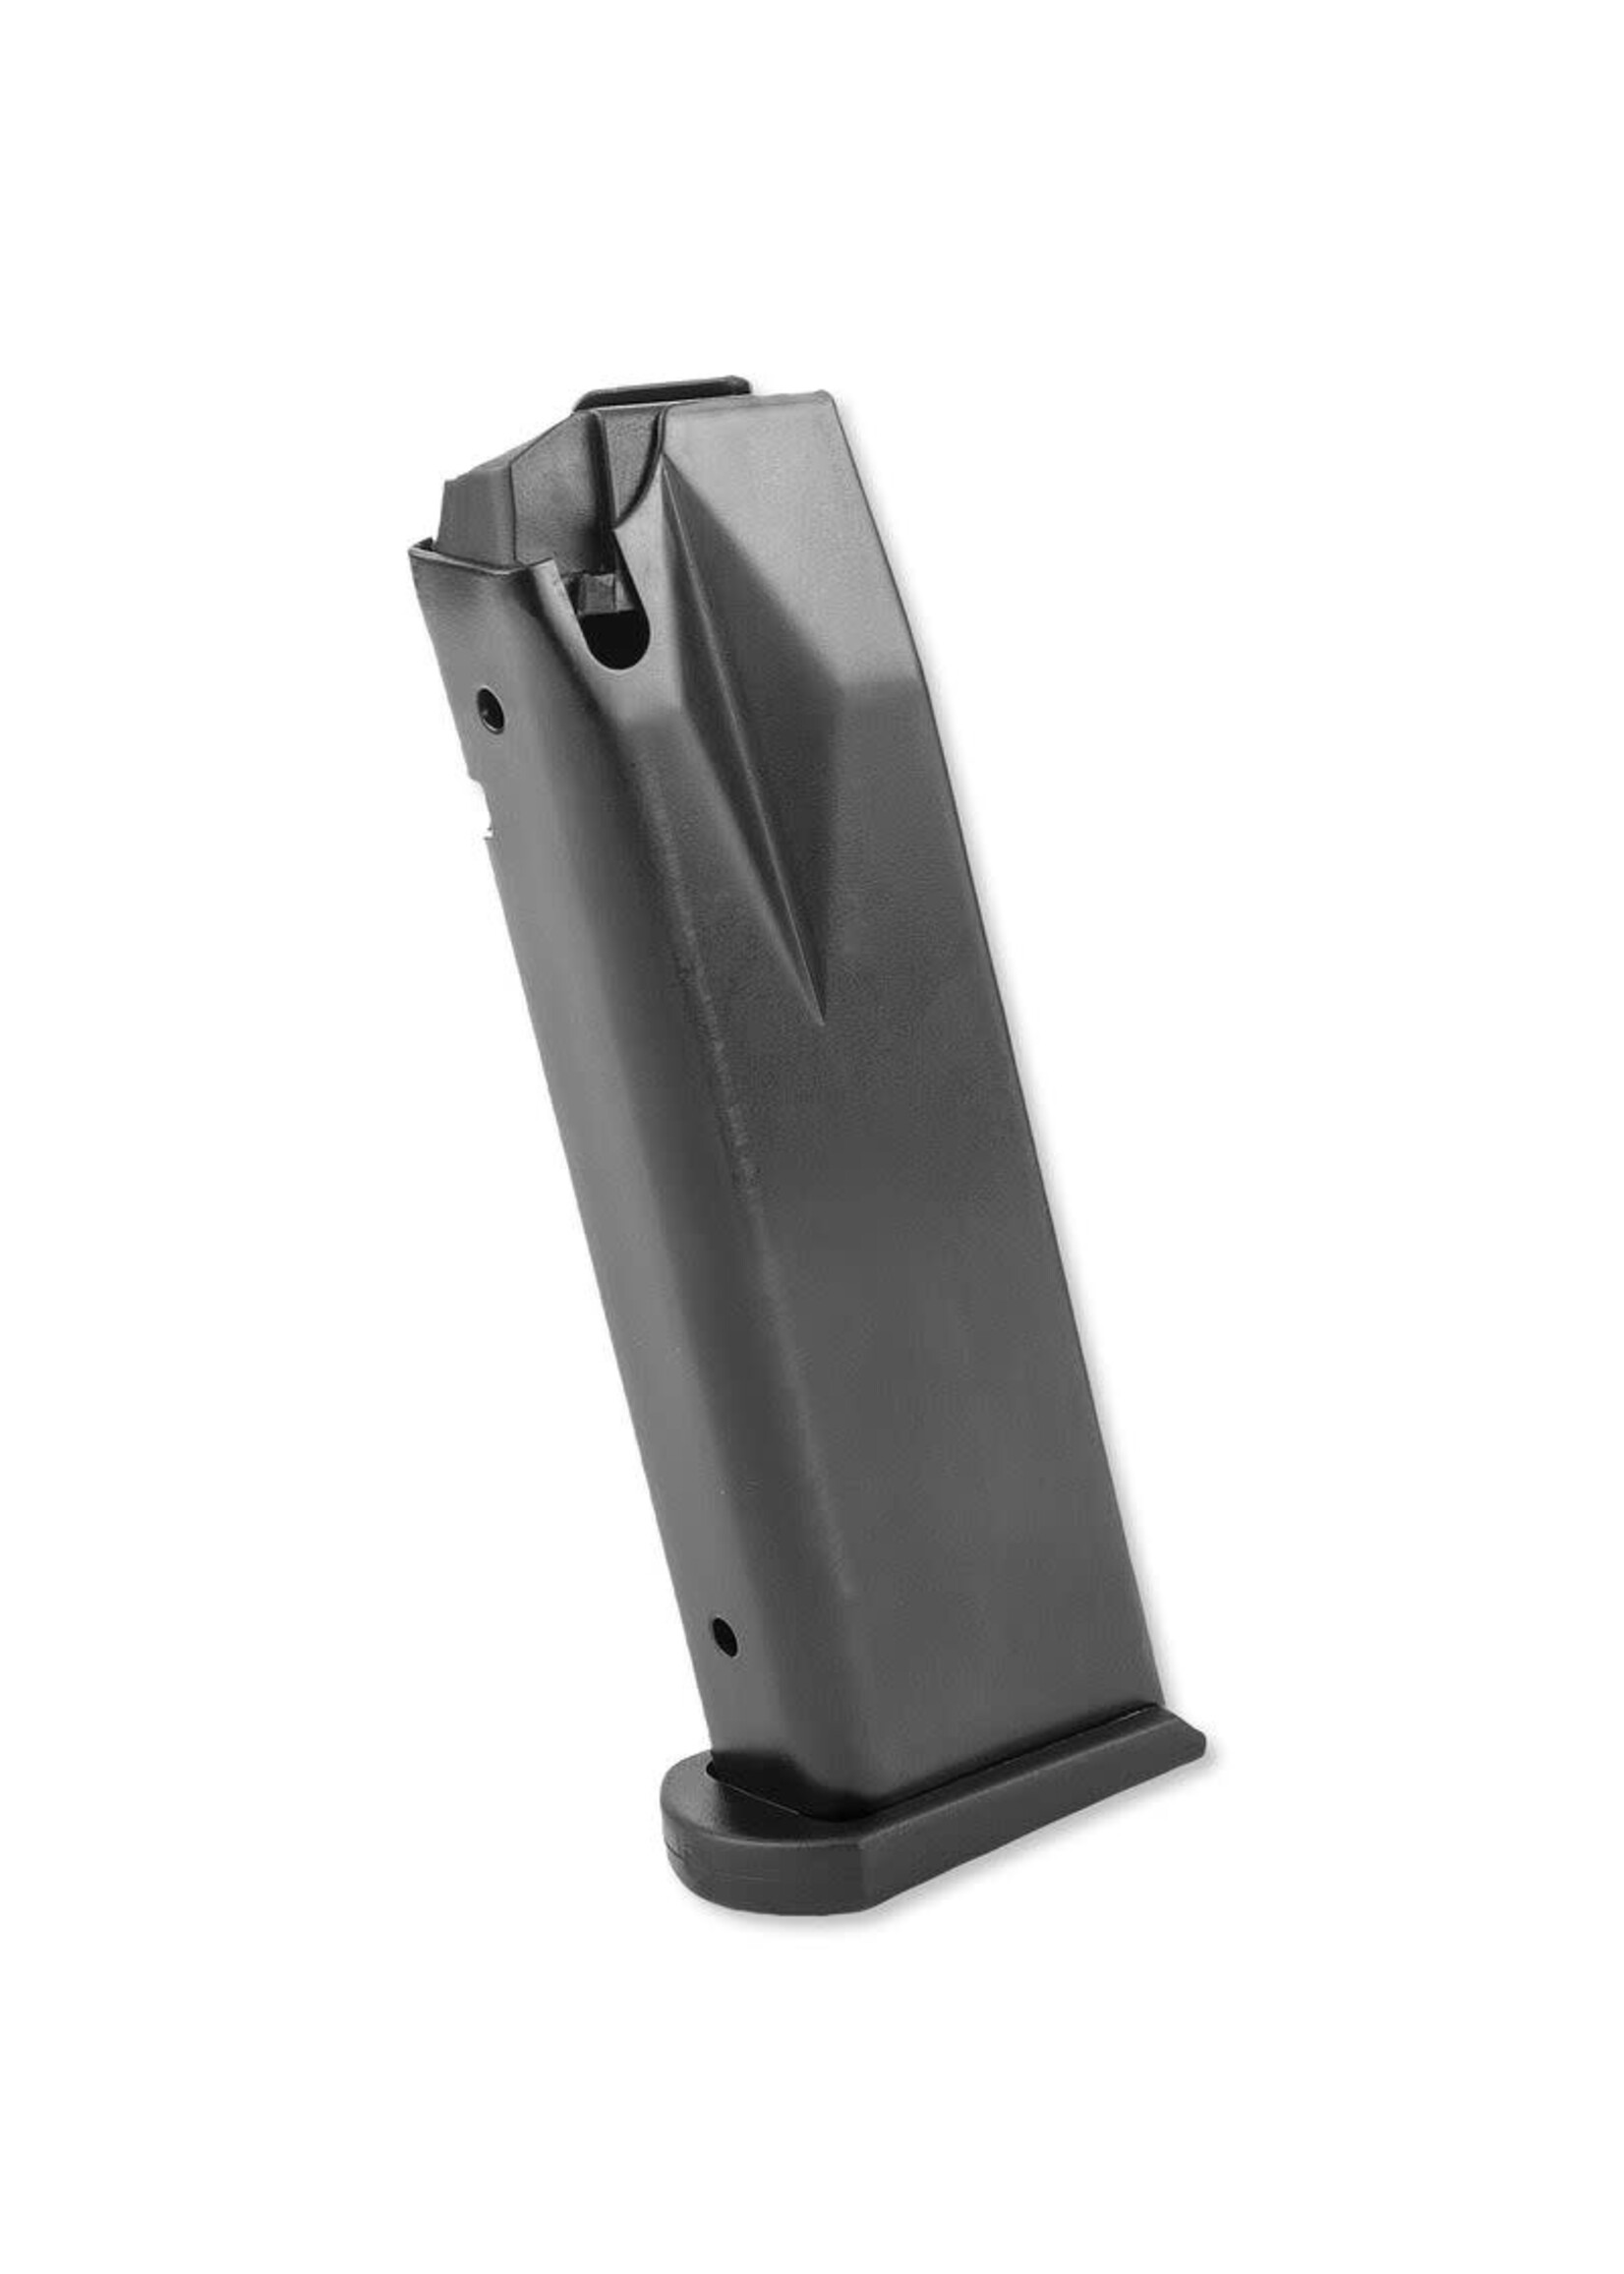 PROMAG WALTHER P99/SW99 9MM 15RD MAGAZINE